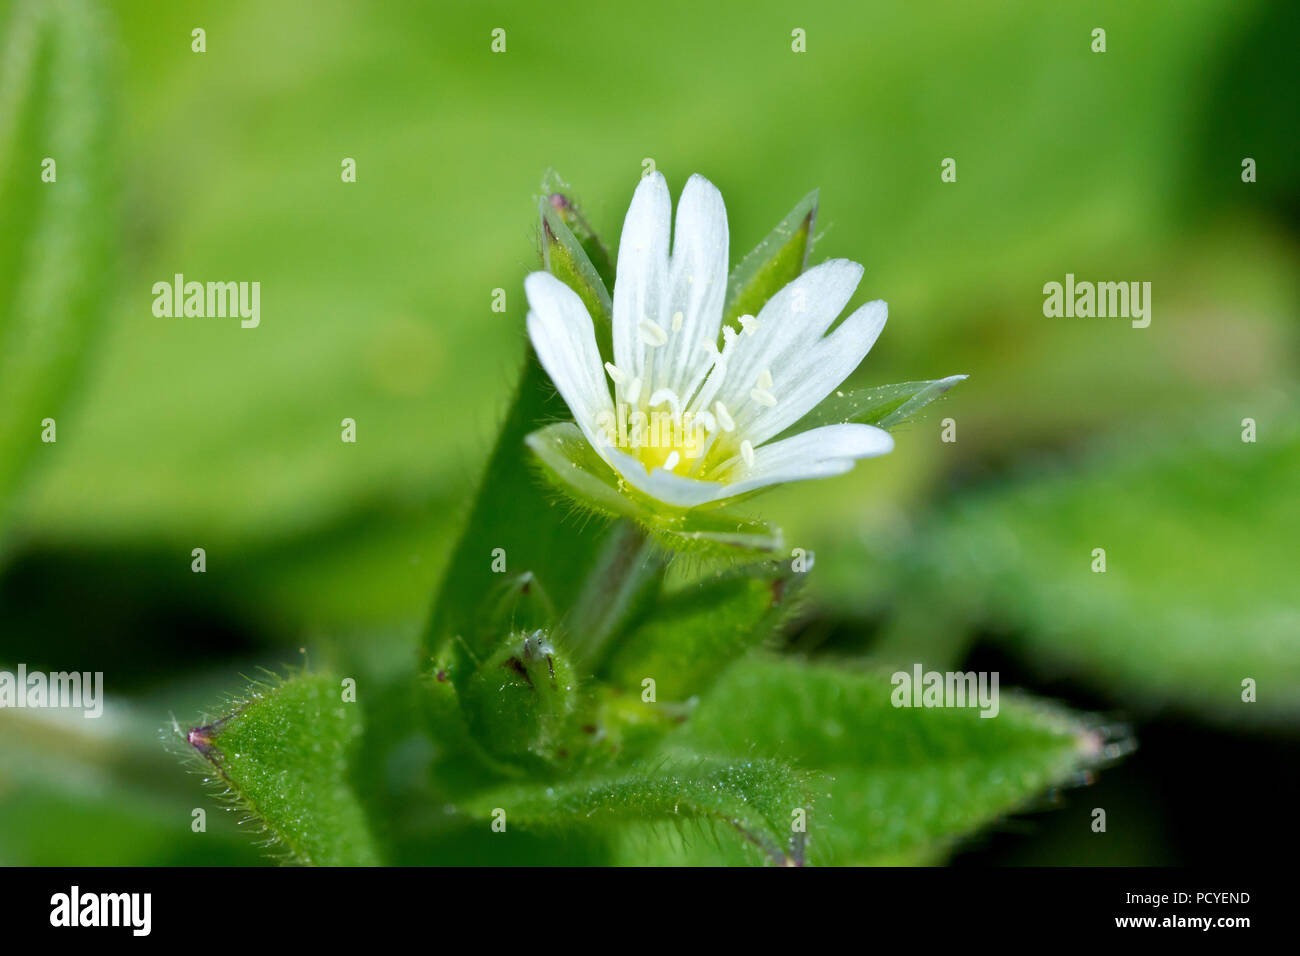 Common Chickweed (cerastium fontanum), also known as Mouse-ear Chickweed, a close up of a single flower. Stock Photo